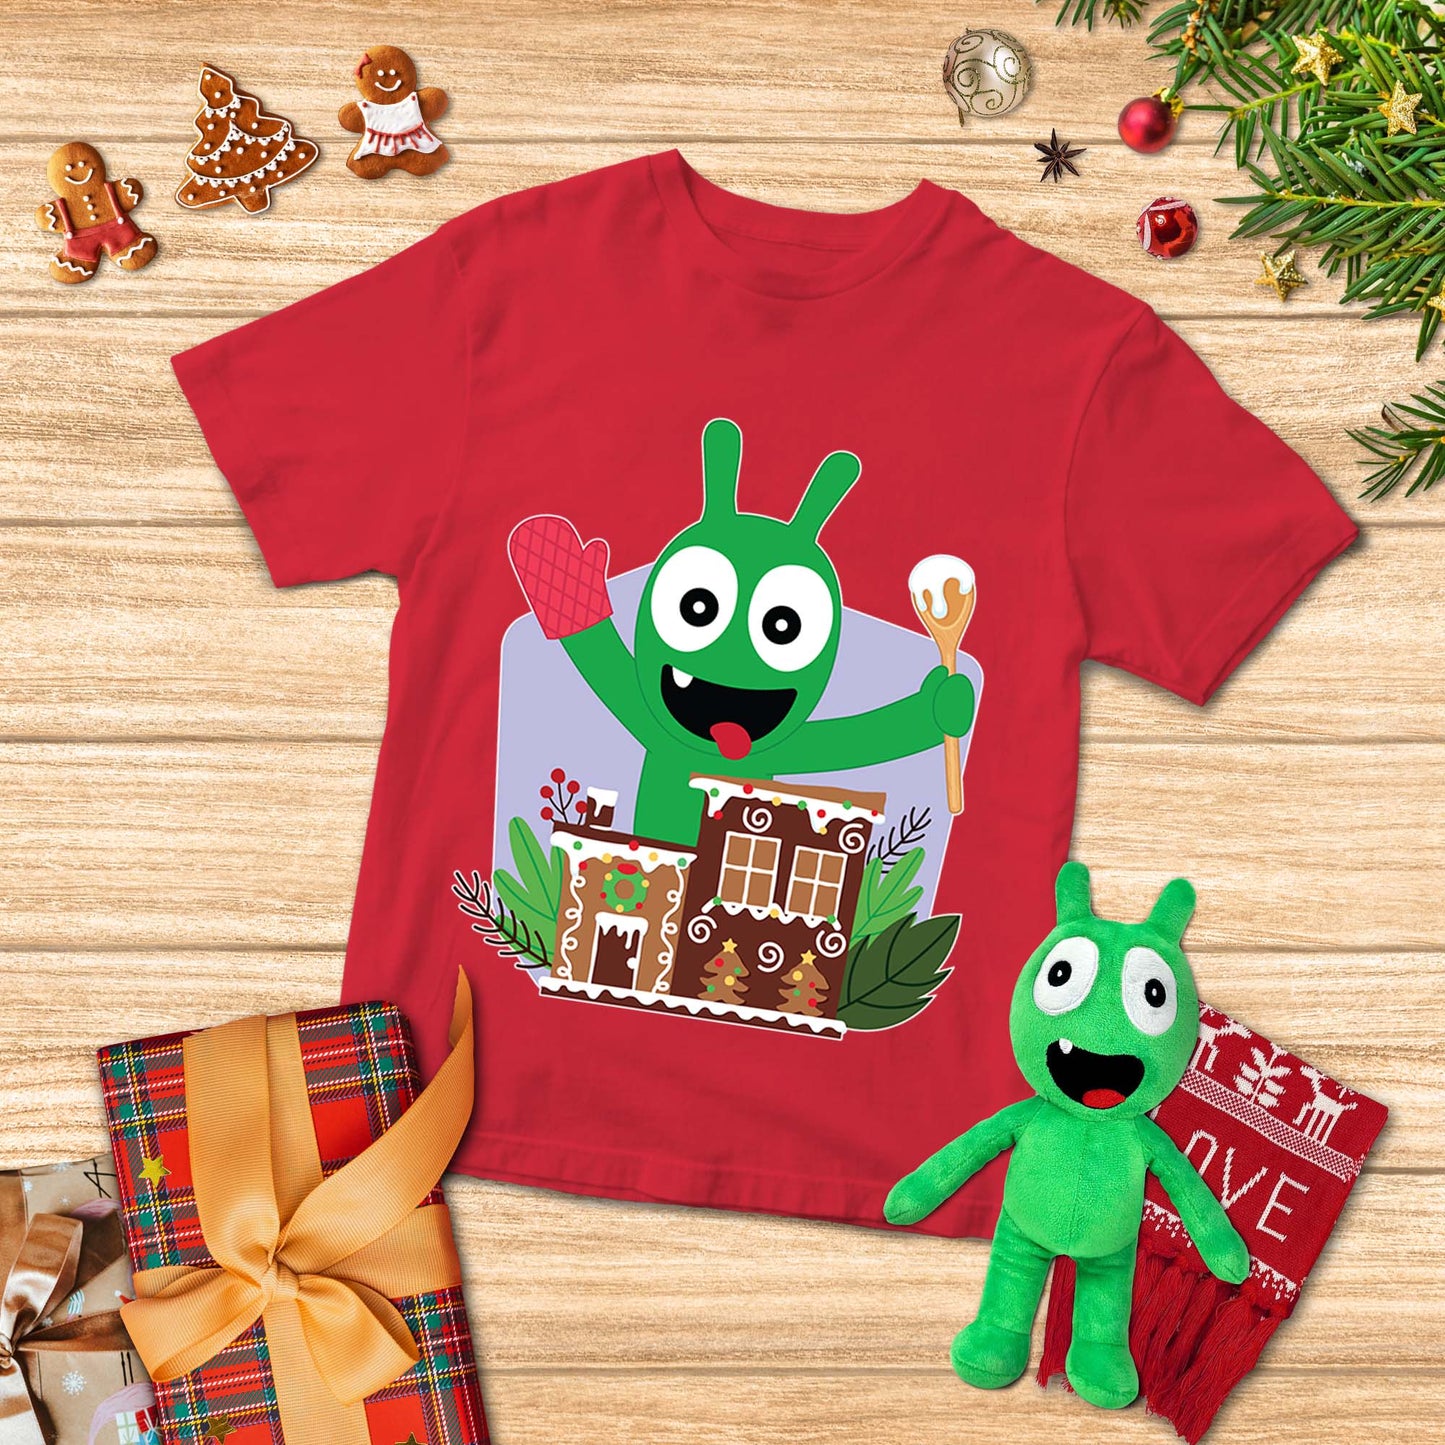 Pea Pea Christmas Gingerbread Youth T-Shirt, Pea Pea Xmas Shirts Gift For Kids Family Friends